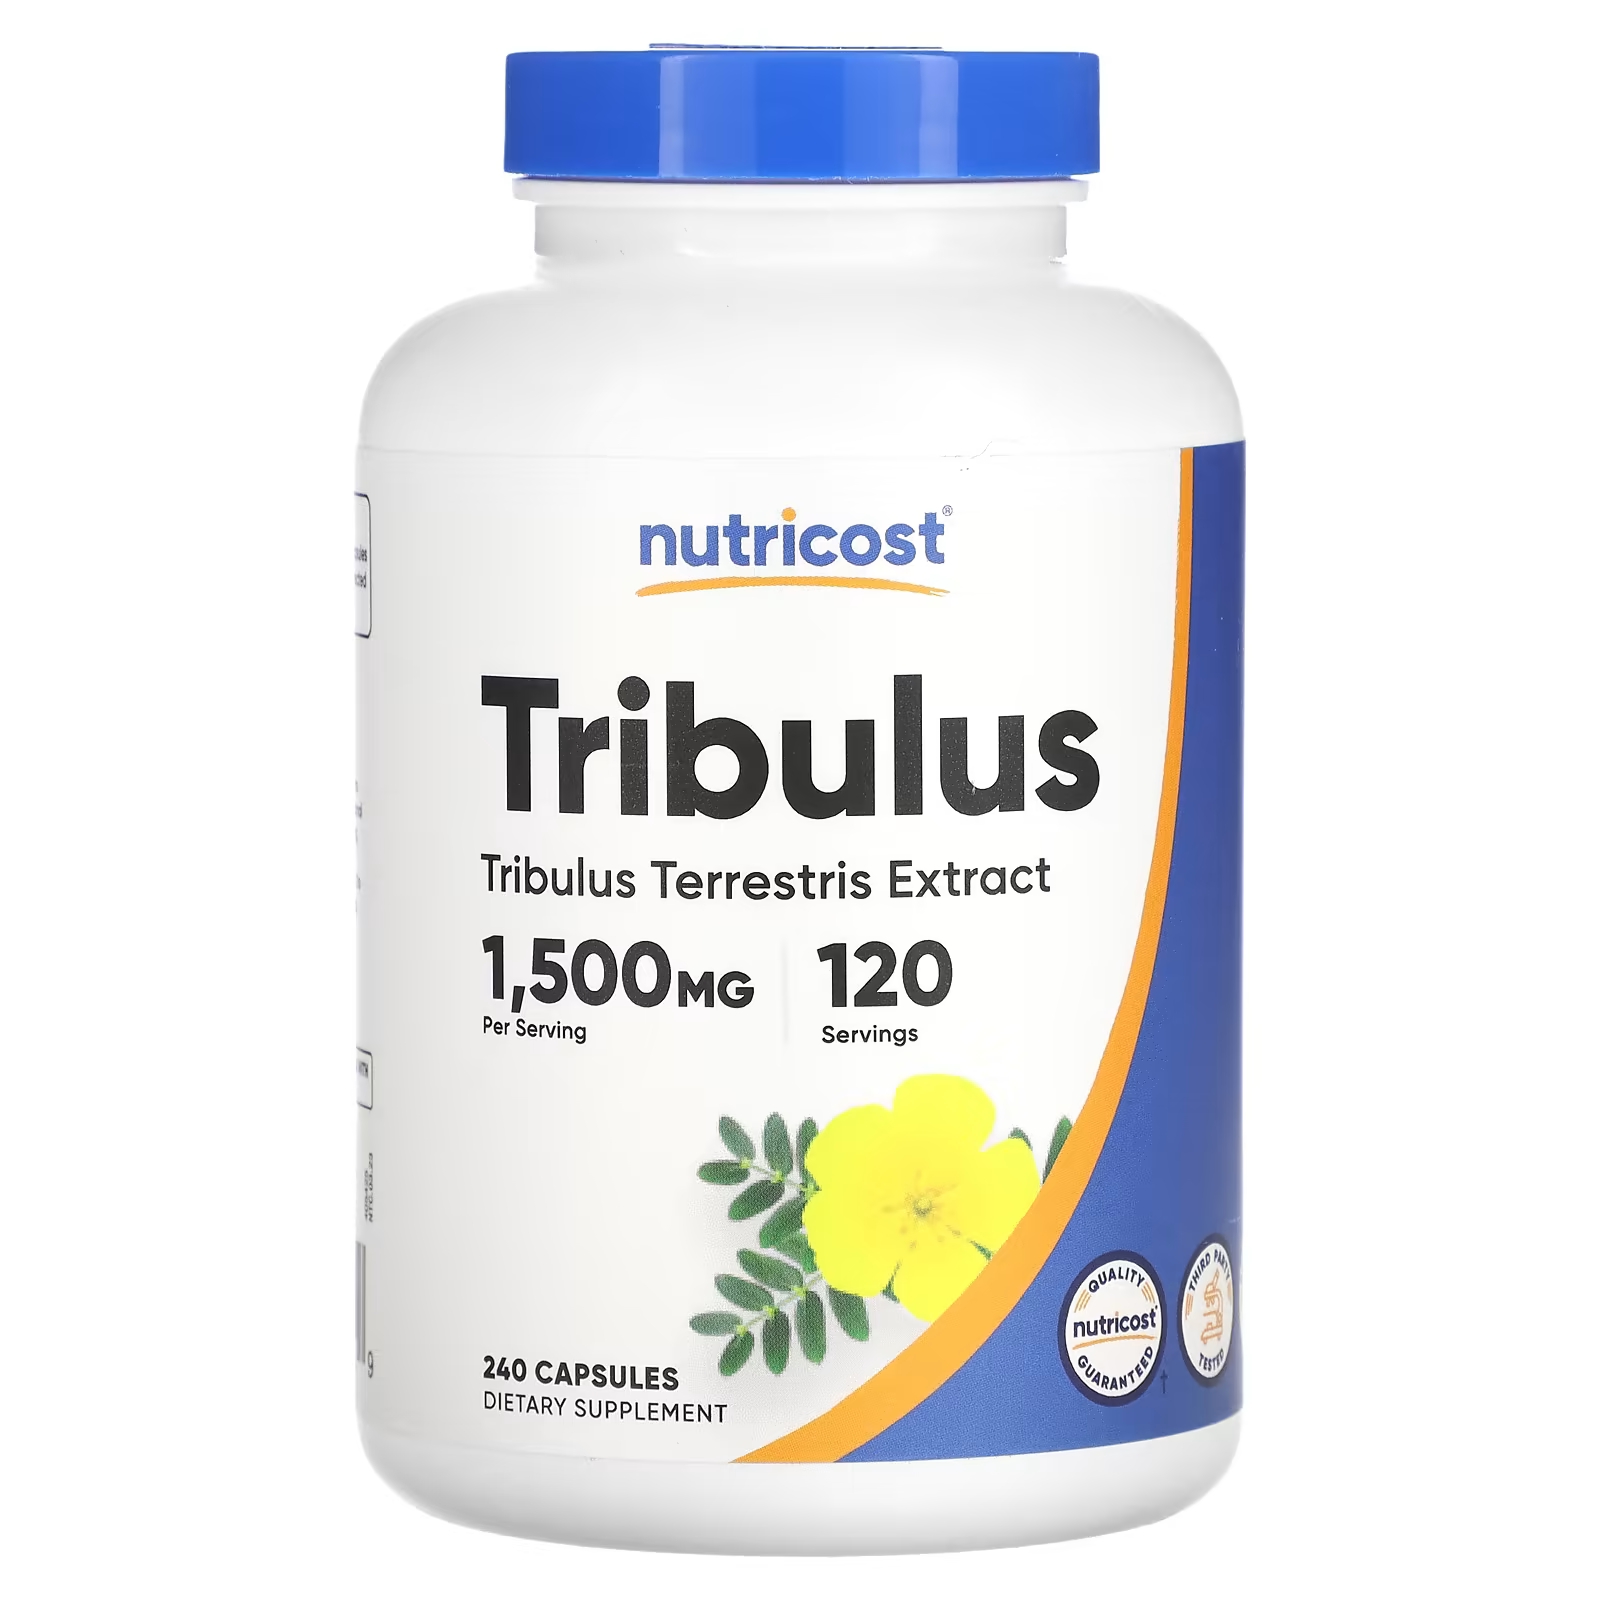 Nutricost Tribulus 1500 мг 240 капсул (750 мг на капсулу)